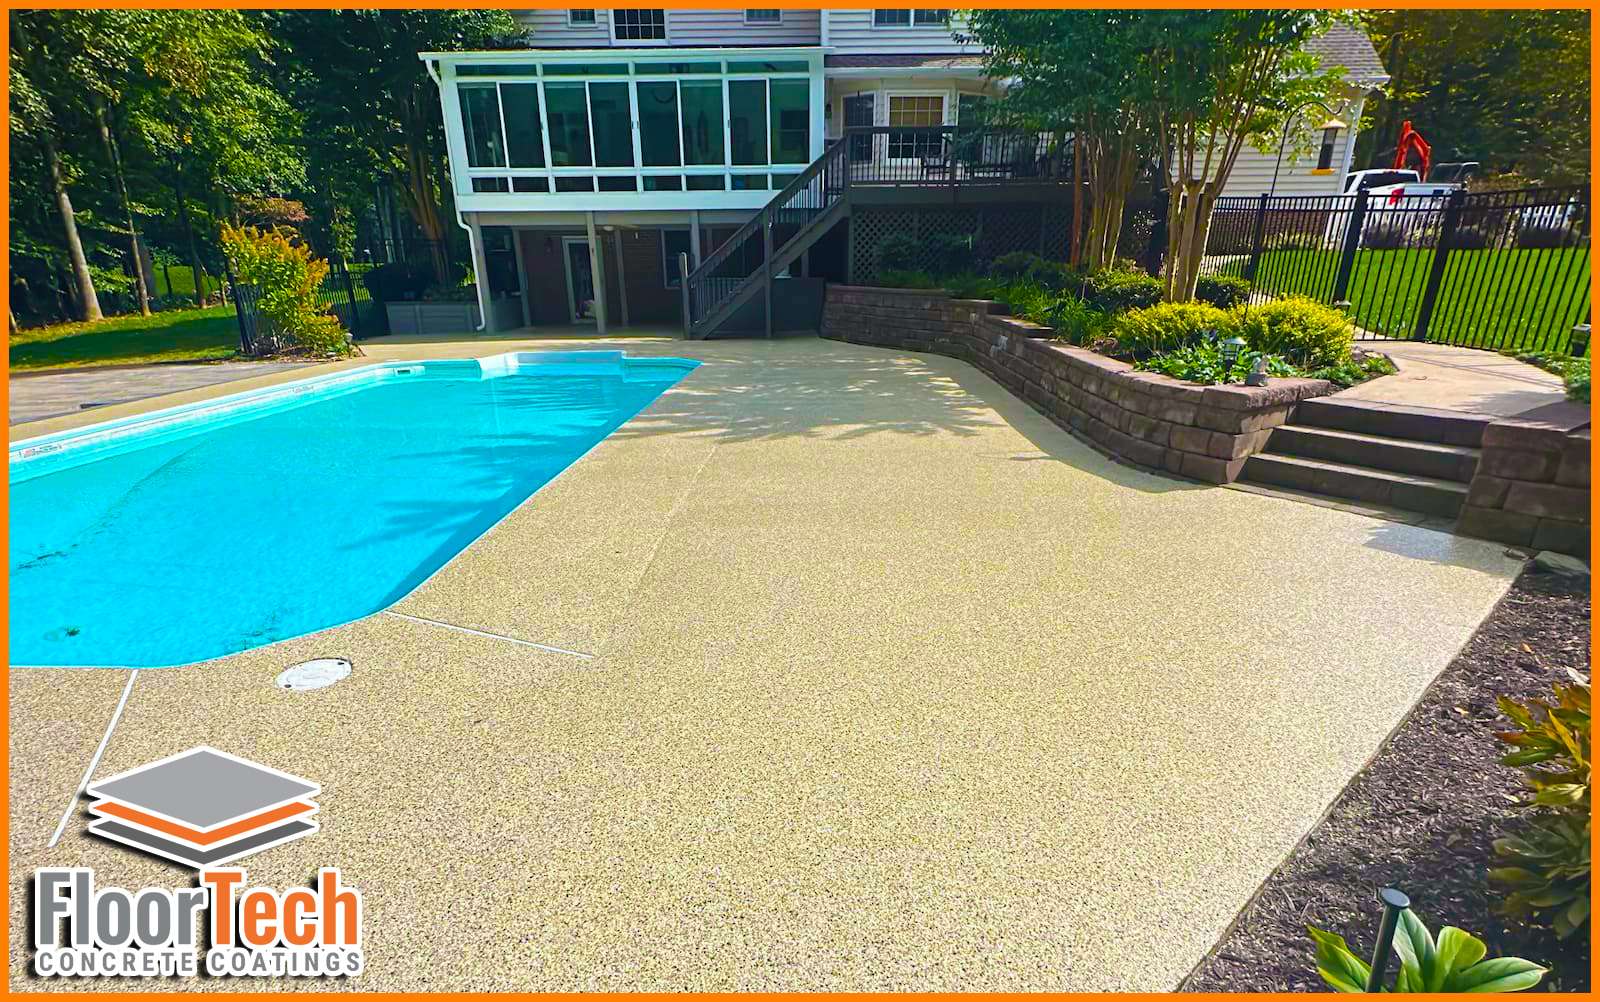 Residential Home with Coated backyard Pool Deck